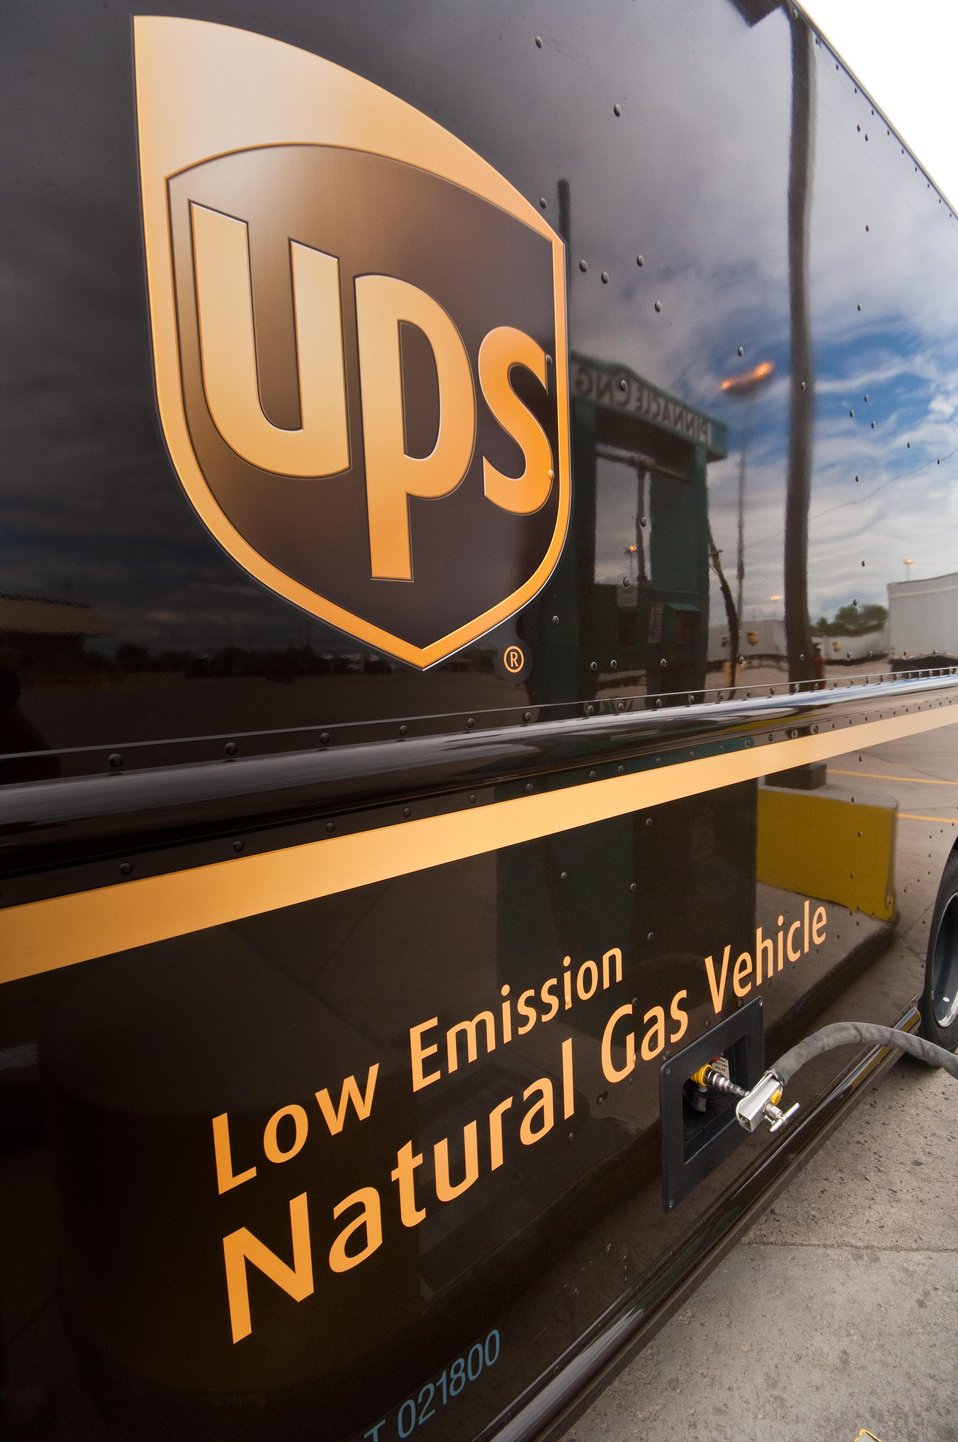 UPS Switching to Renewable Natural Gas to Reduce its GHG Emissions